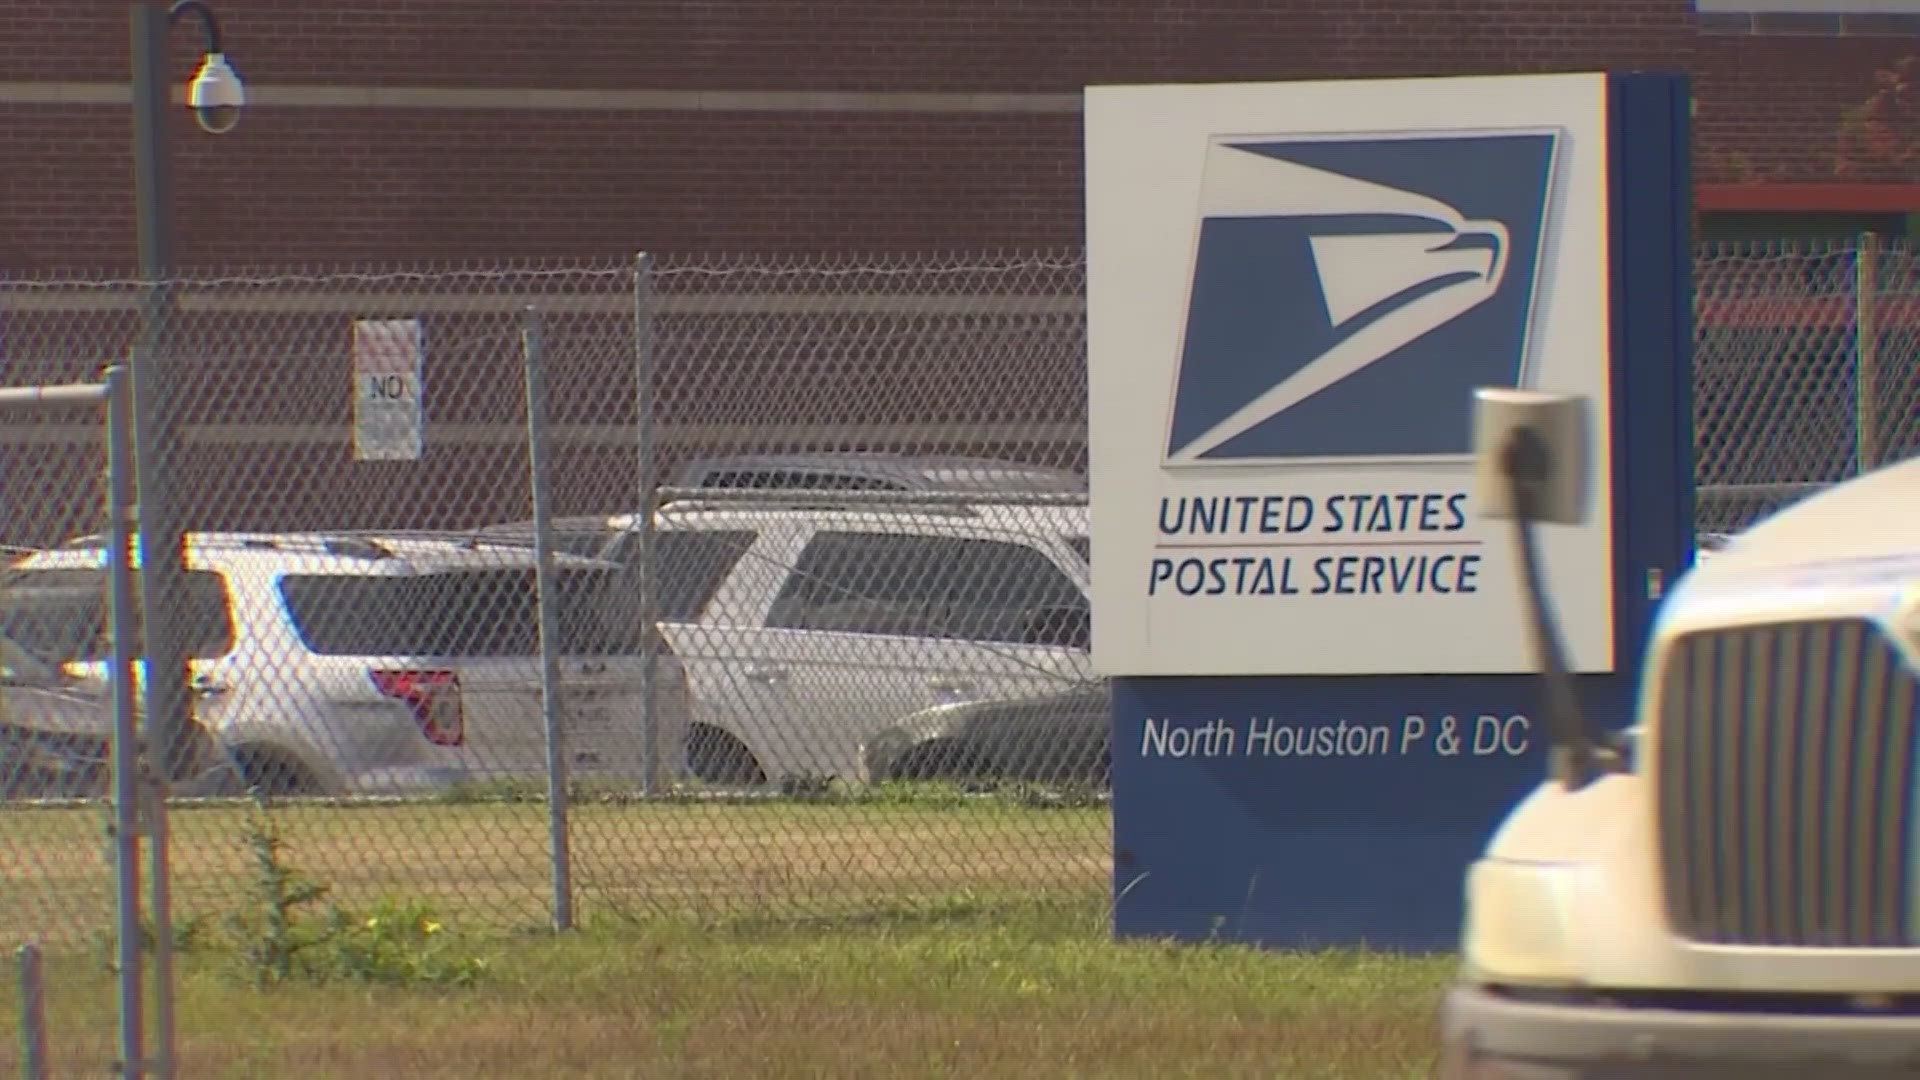 In a letter to Congress, a high-ranking USPS official responded to elected officials' questions brought on by KHOU 11's reporting of the delays.